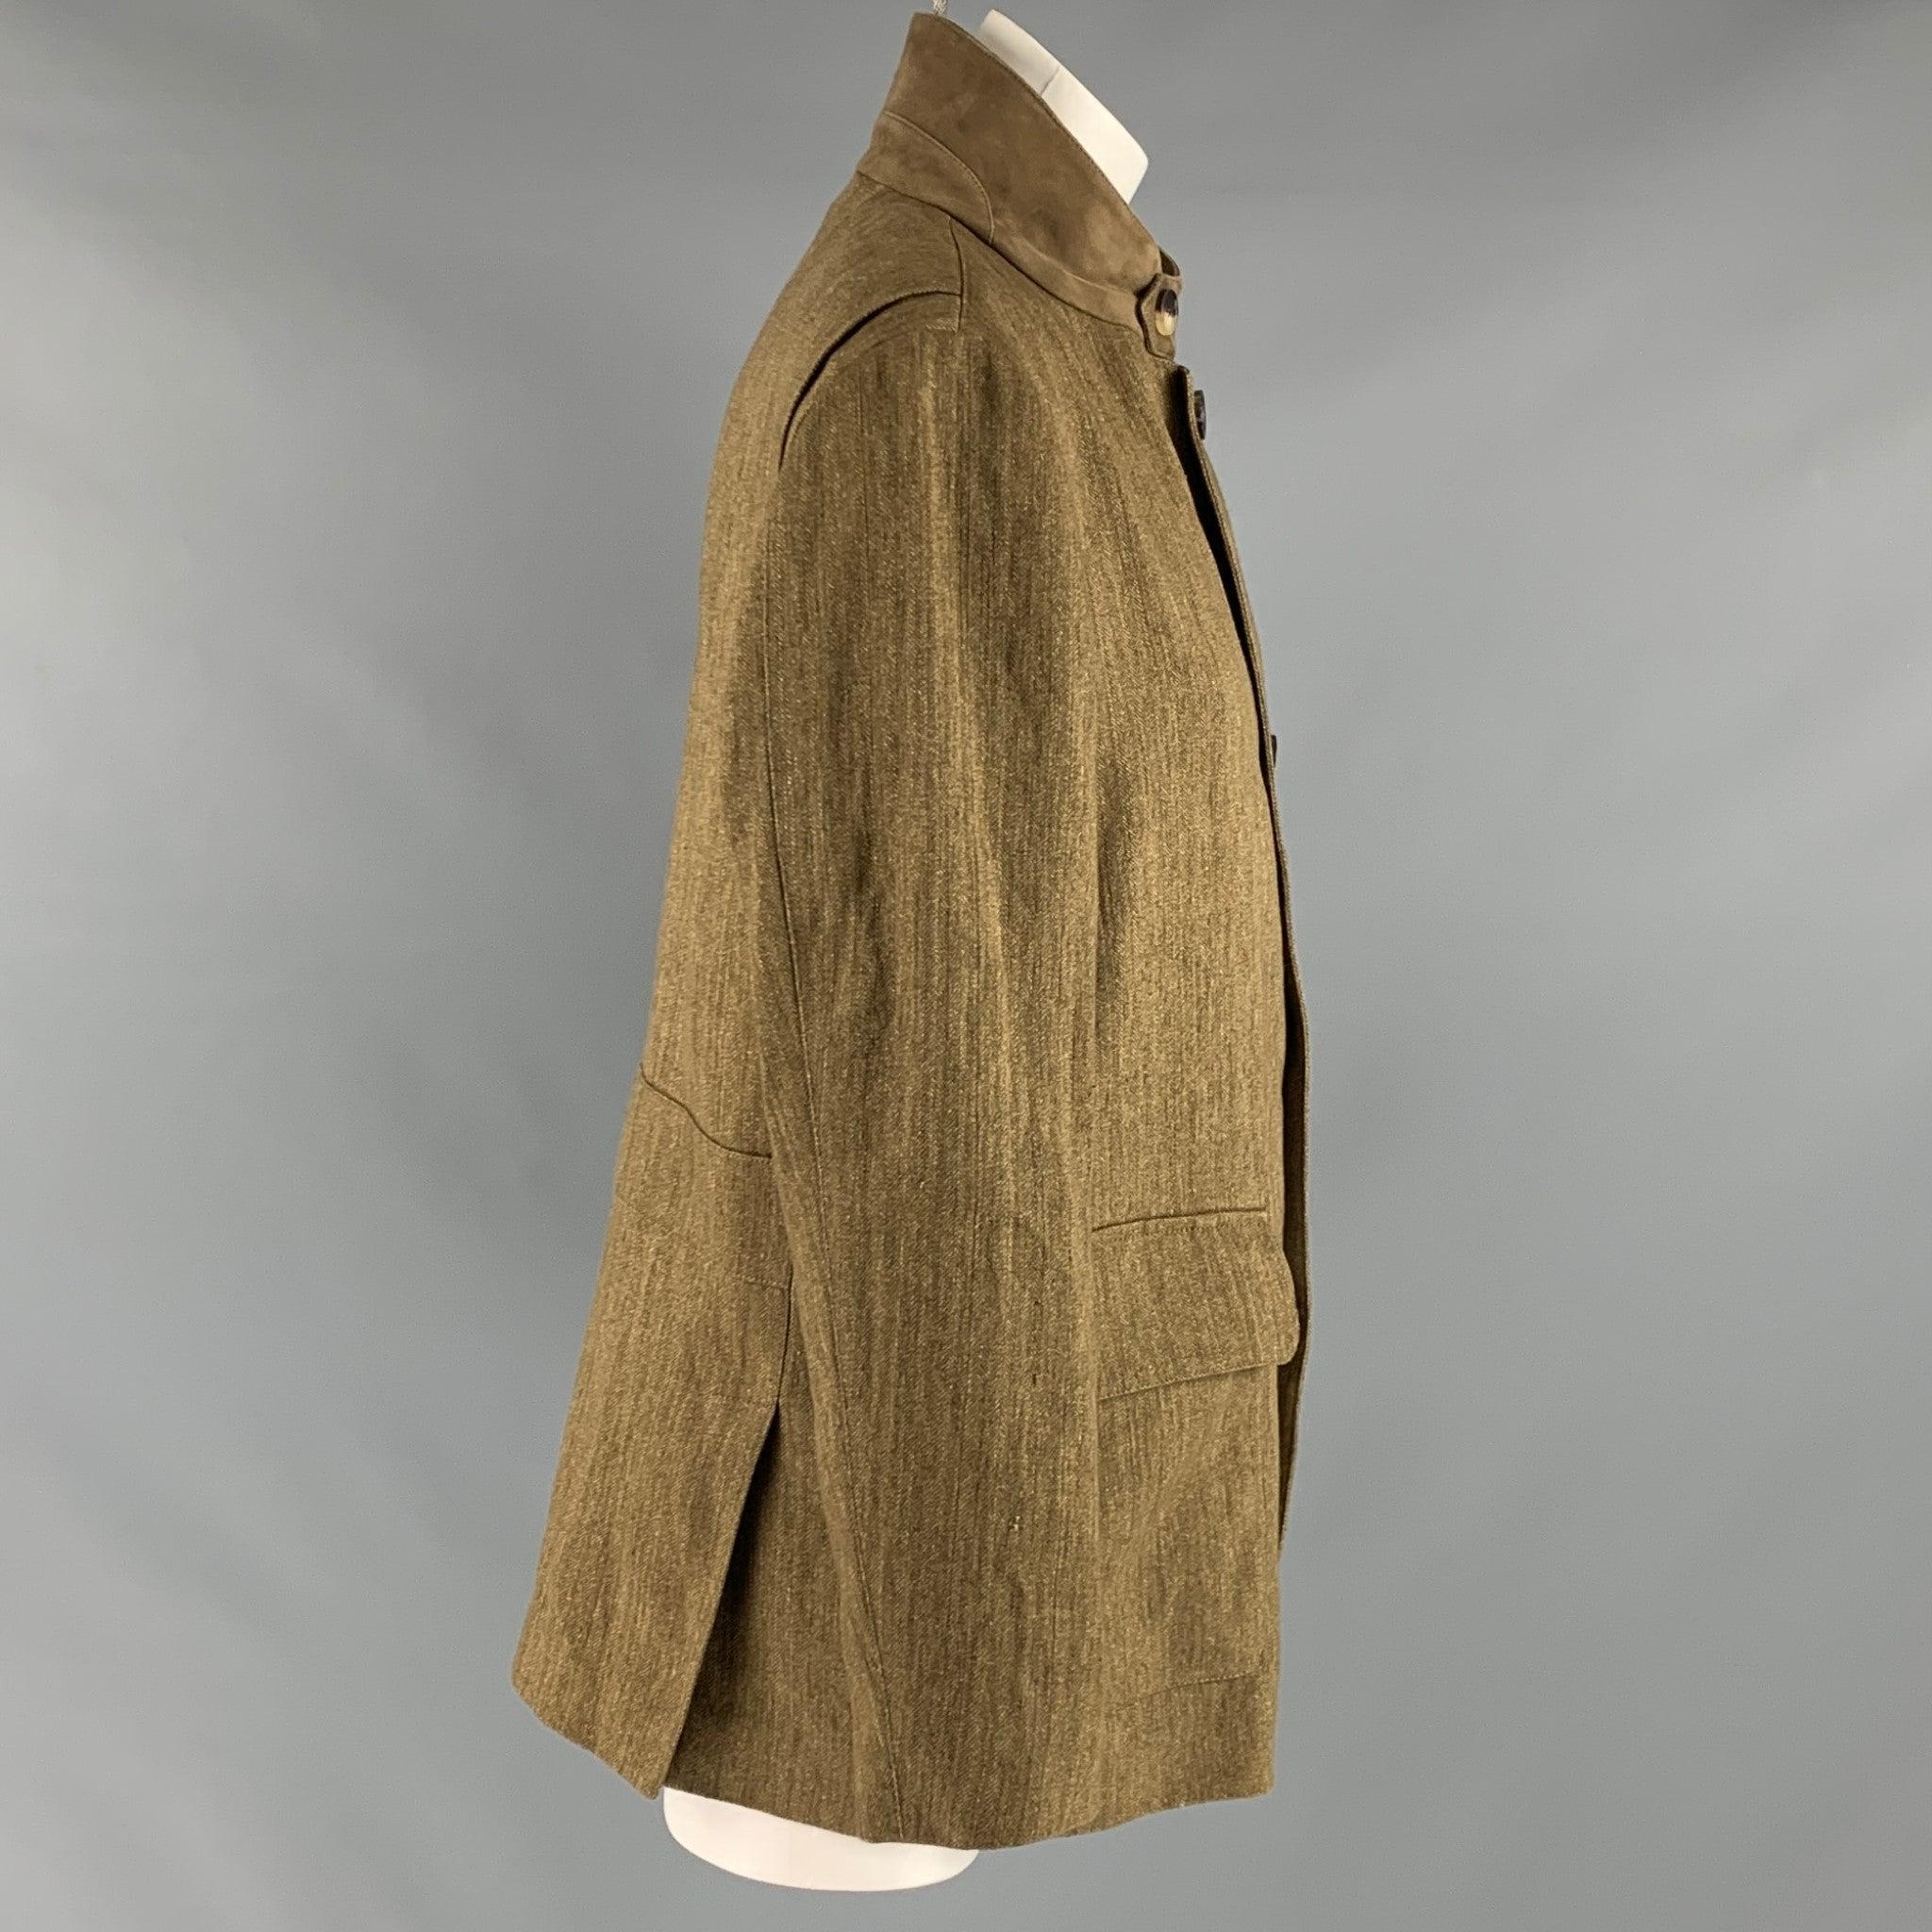 LORO PIANA Giubb Roadster comes in a brown and olive fax herringbone woven material with a full liner featuring a flap pockets, and zip up closure.
 Made in Italy.Excellent Pre-Owned Condition. 

Marked:   S 

Measurements: 
 
Shoulder: 16 inches